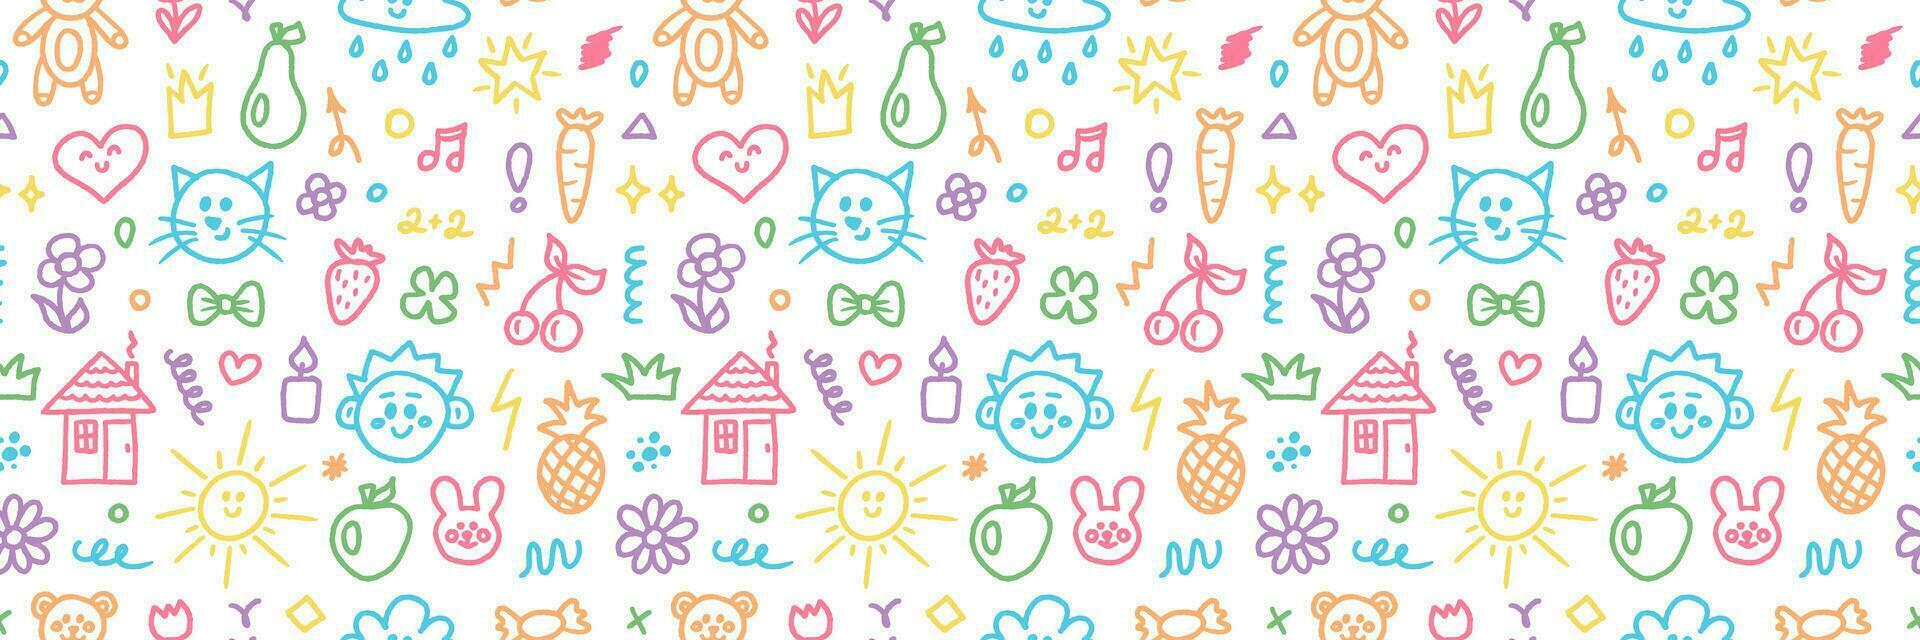 Doodle hand drawn kids seamless pattern. Colorful element of scribble, heart, animal, flower, sun and cloud. Vector illustration